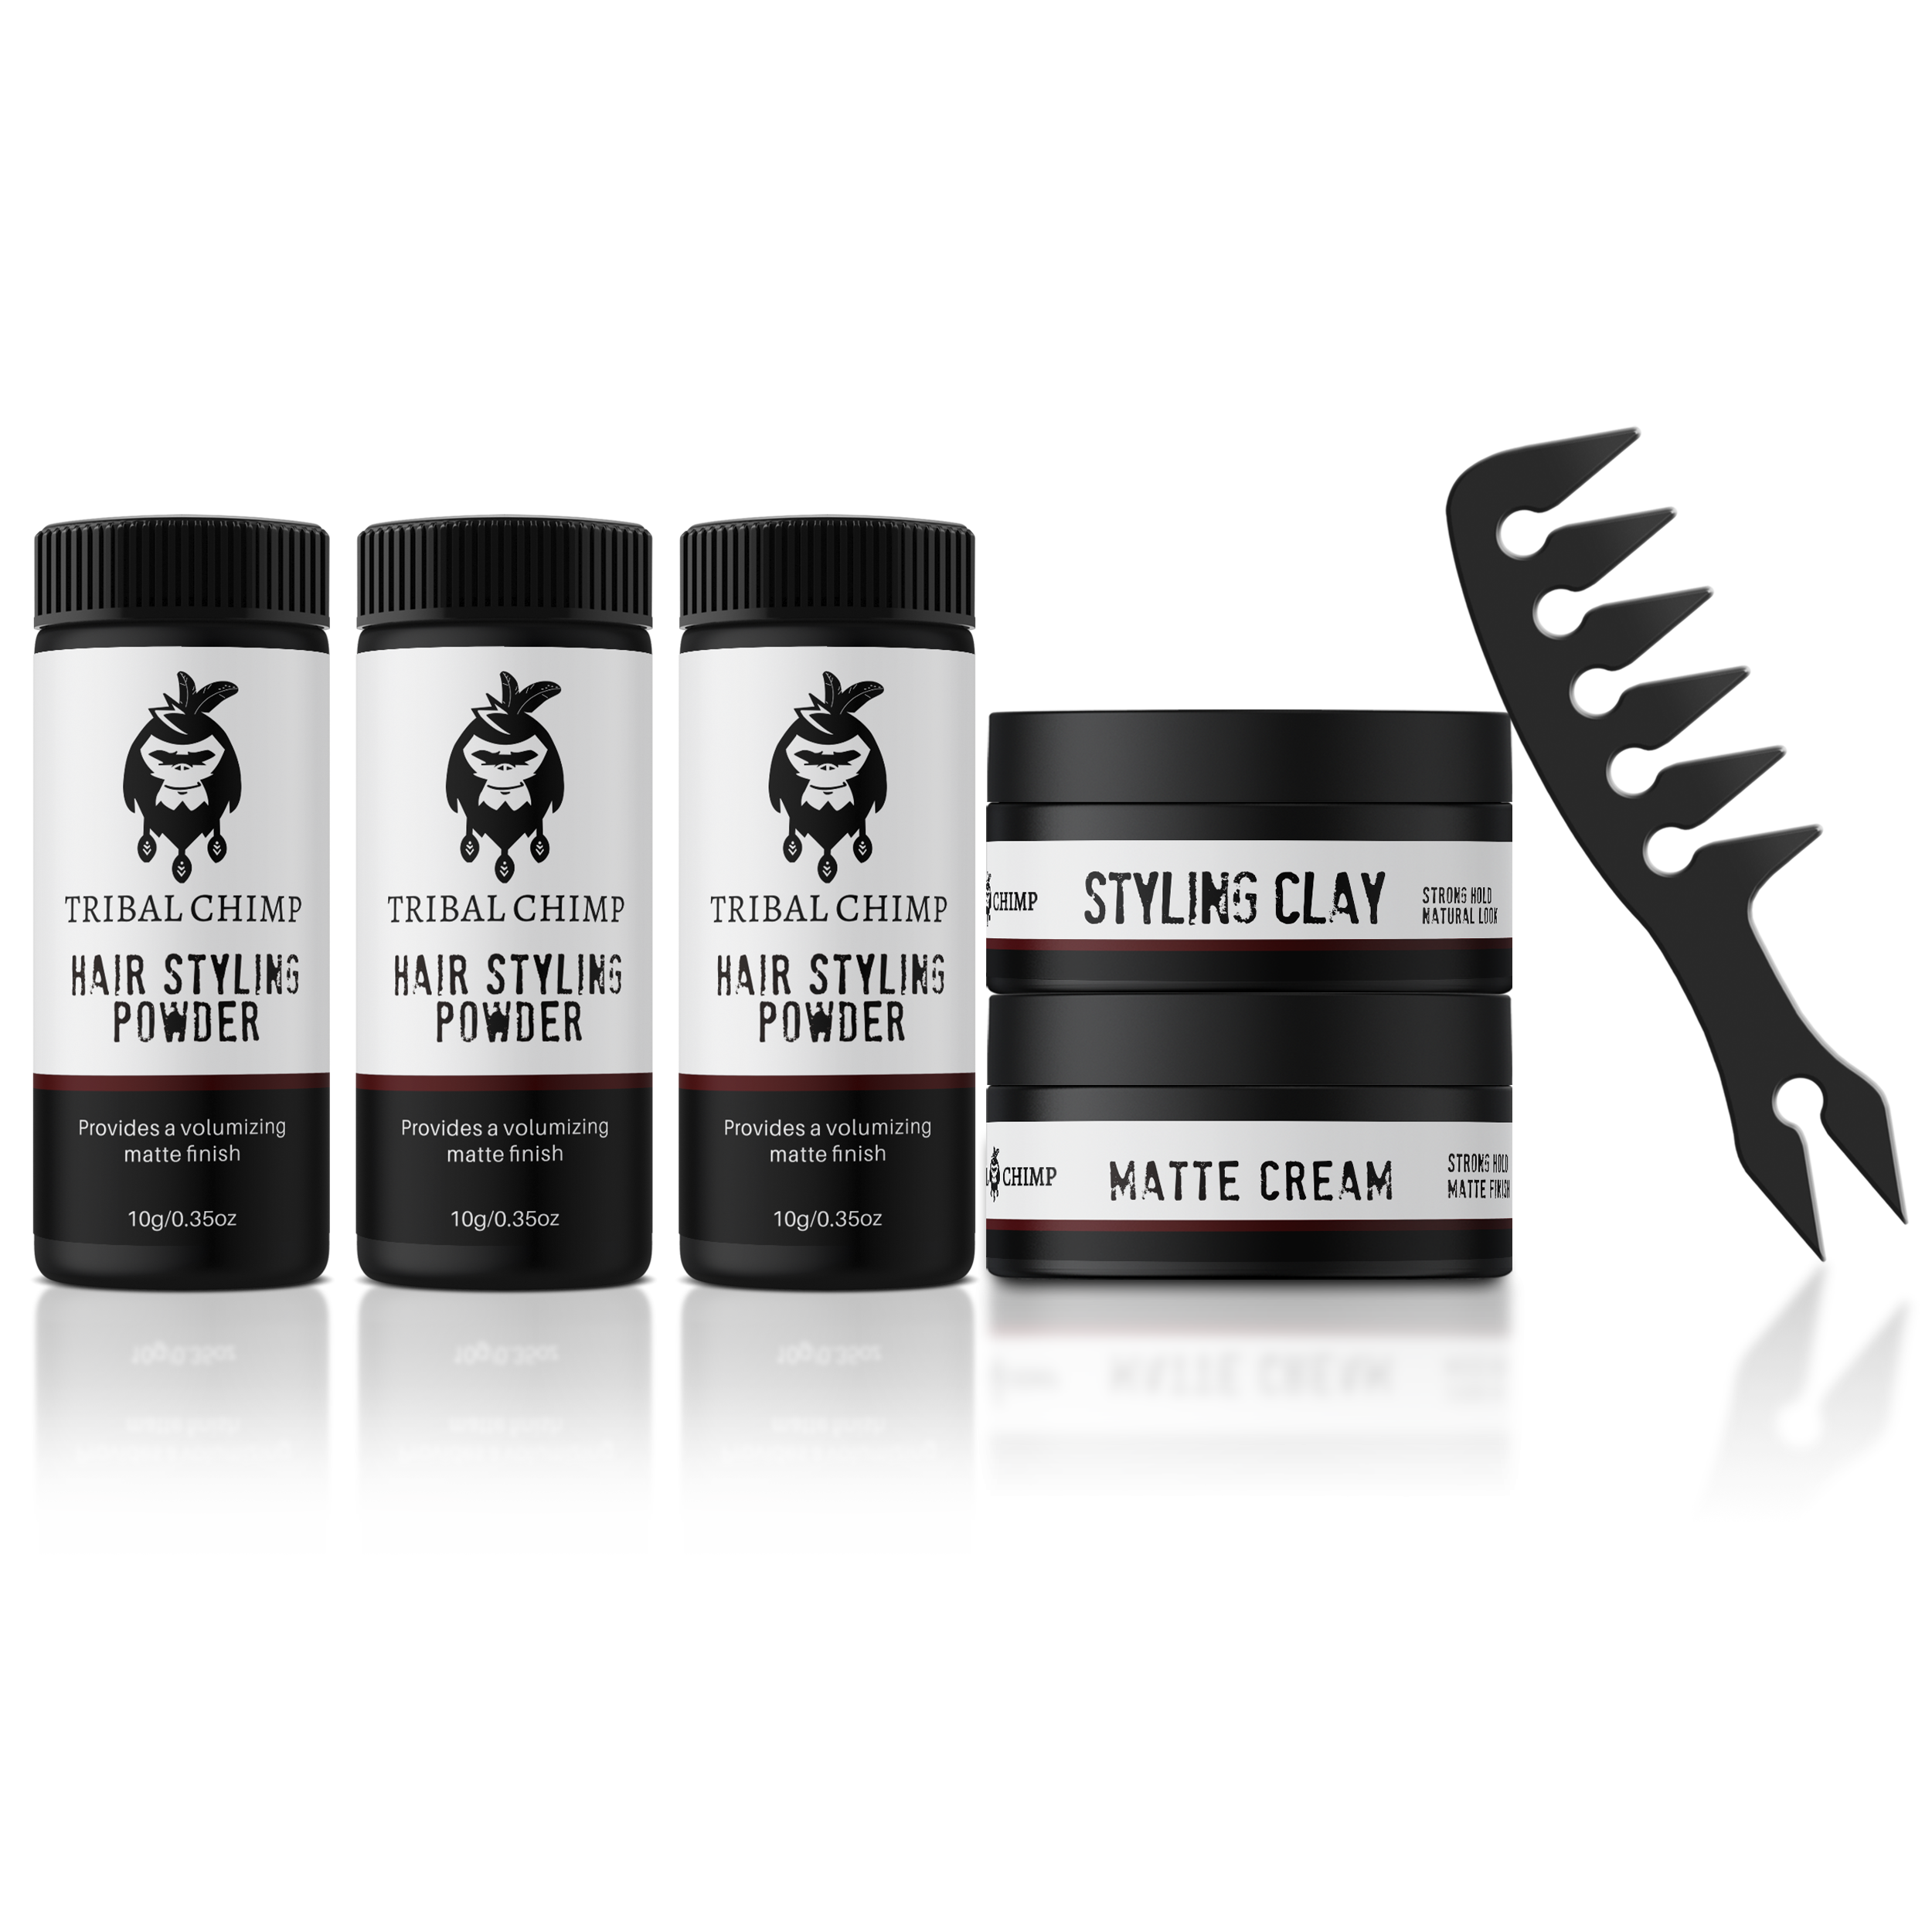 Three containers of 'TRIBAL CHIMP' hair styling products with a comb graphic.